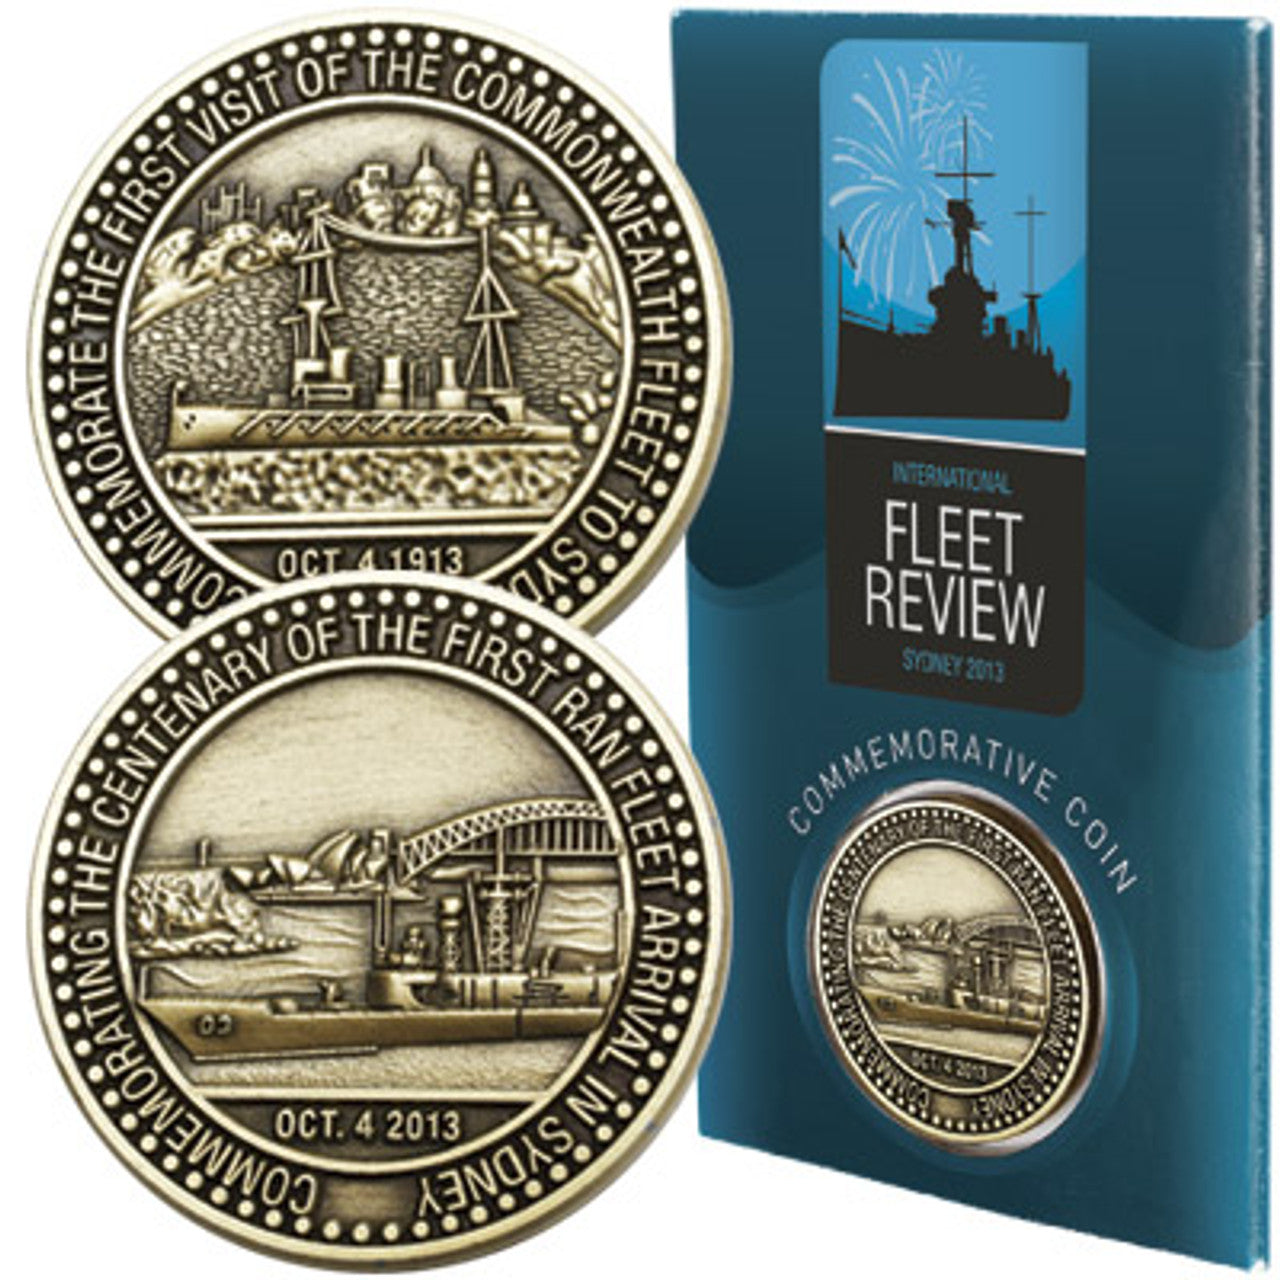 The Celebrate the Royal Australian Navy's 100 year milestone with the IFR Coin in Blister Pack is a treasured memento, featuring the IFR celebration logo on the face and a reproduction of the 1913 commemorative coin with HMAS Australia on the reverse. www.defenceqstore.com.au